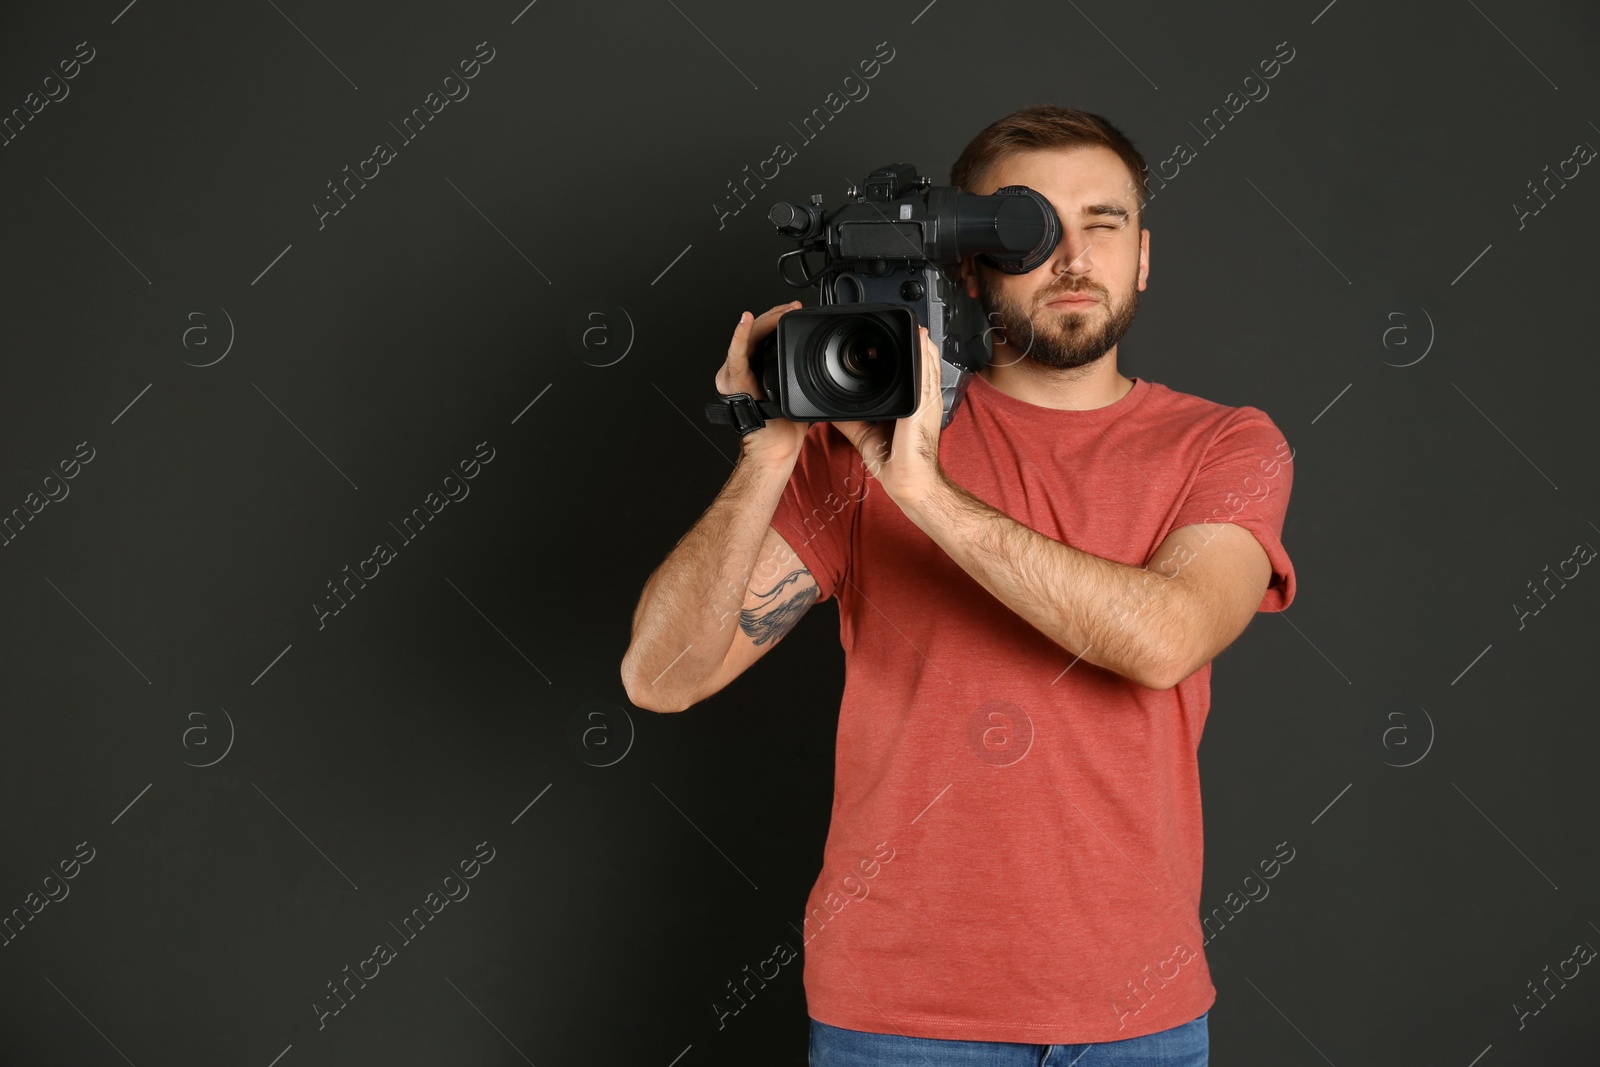 Photo of Operator with professional video camera on black background